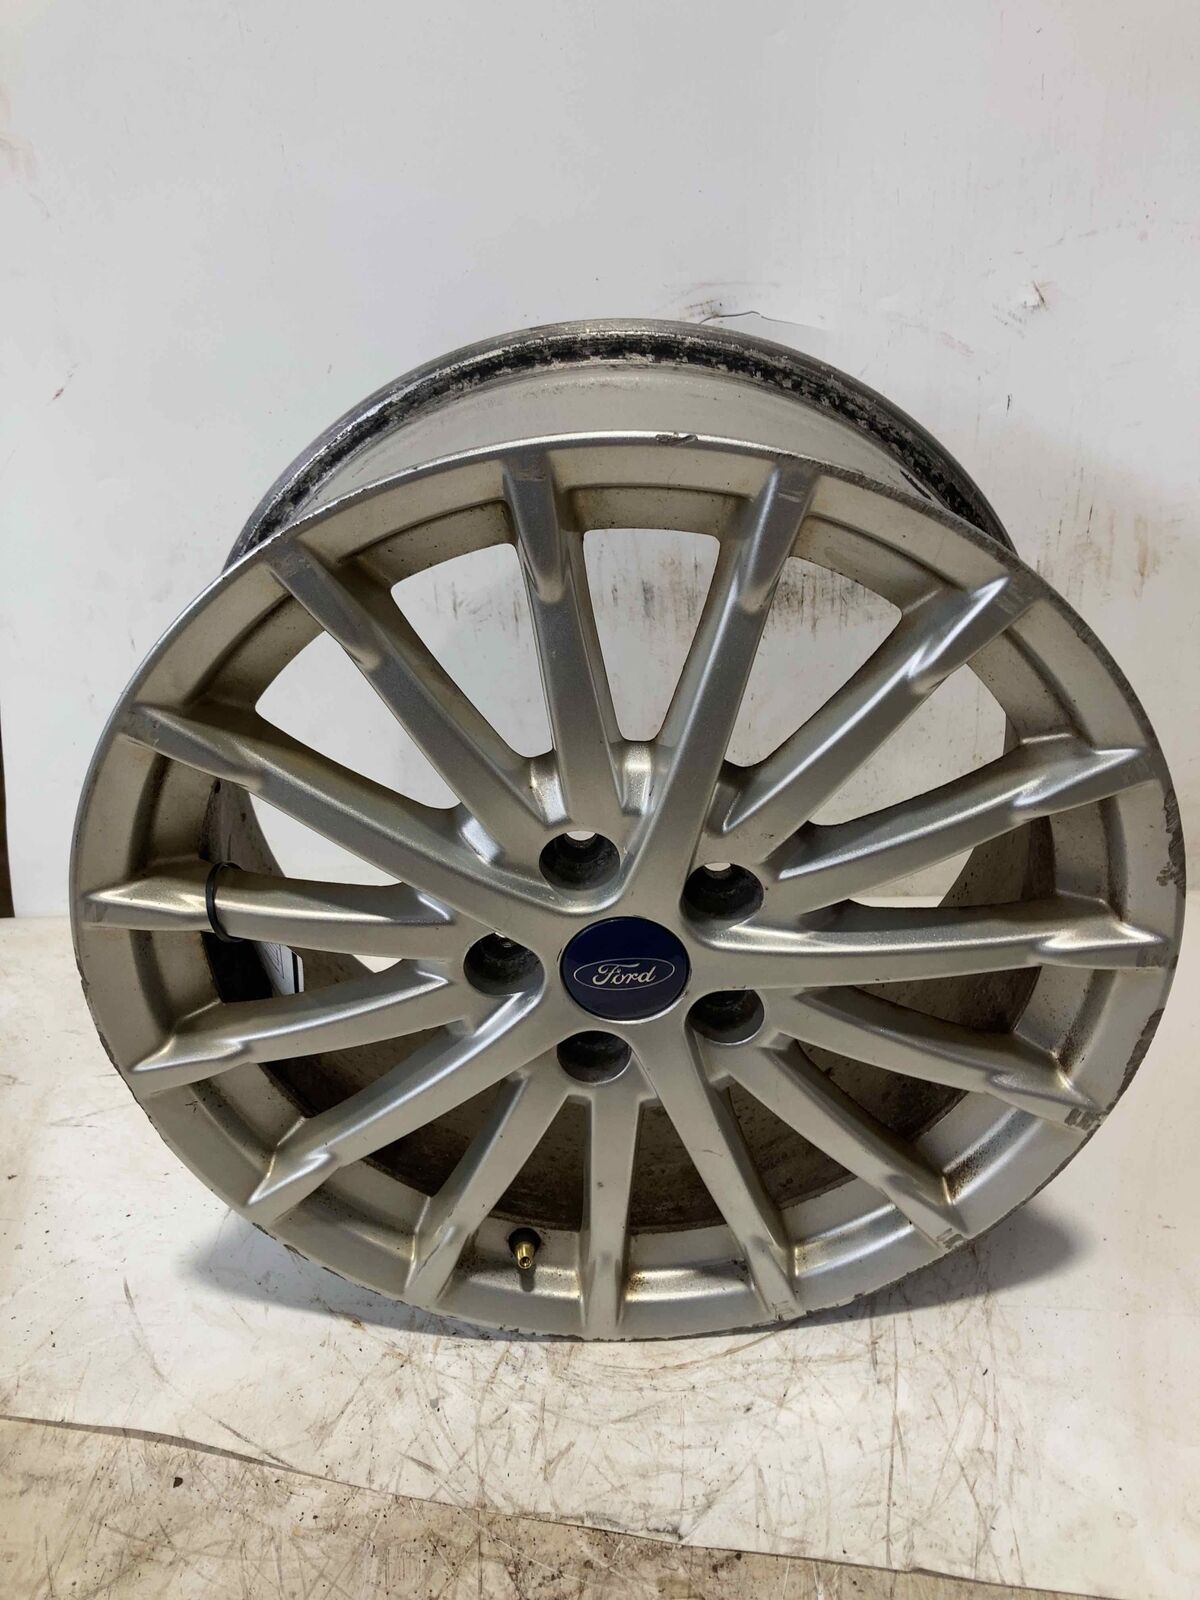 Used Wheel fits: 2013 Ford C-max 17x7 alloy 15 spoke Grade C